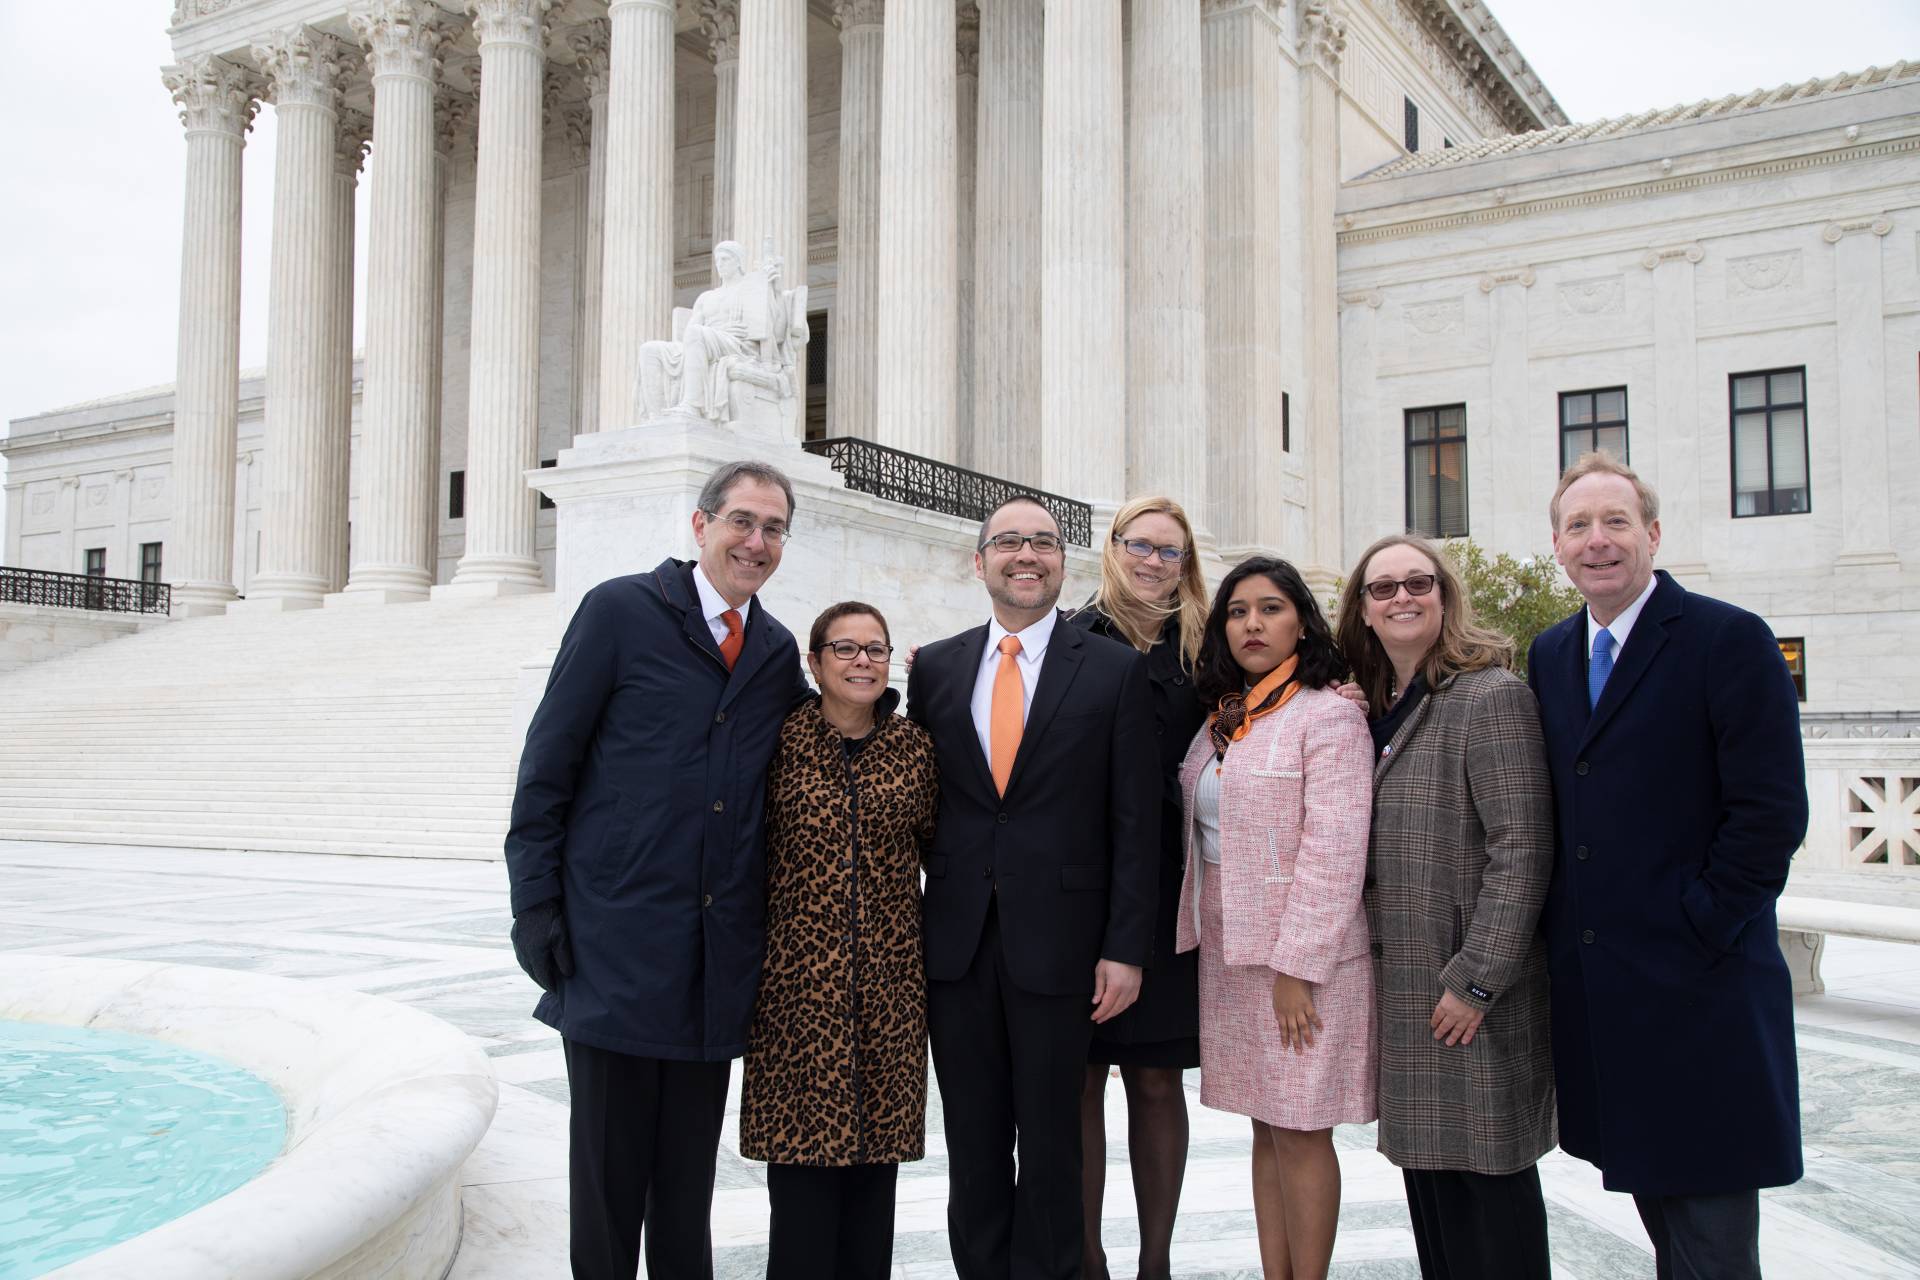 Eisgruber, Romero, Sanchez, Smith, and legal team pose in front of the Supreme Court building